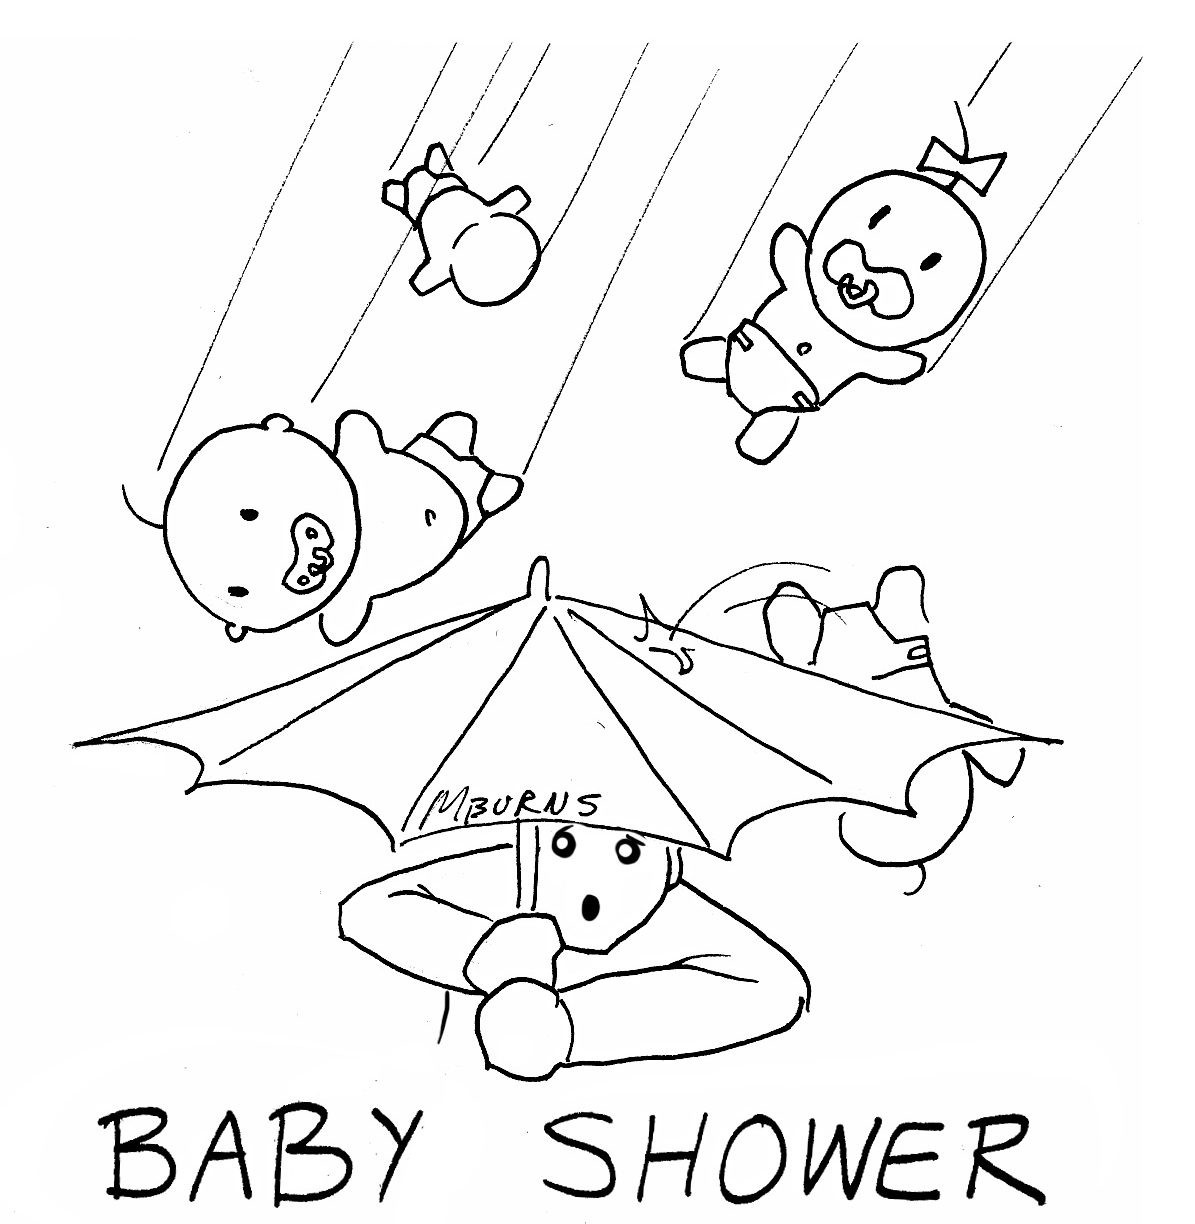 Baby Shower Coloring Pages | Purplegirl - Free Printable Baby Shower Coloring Pages